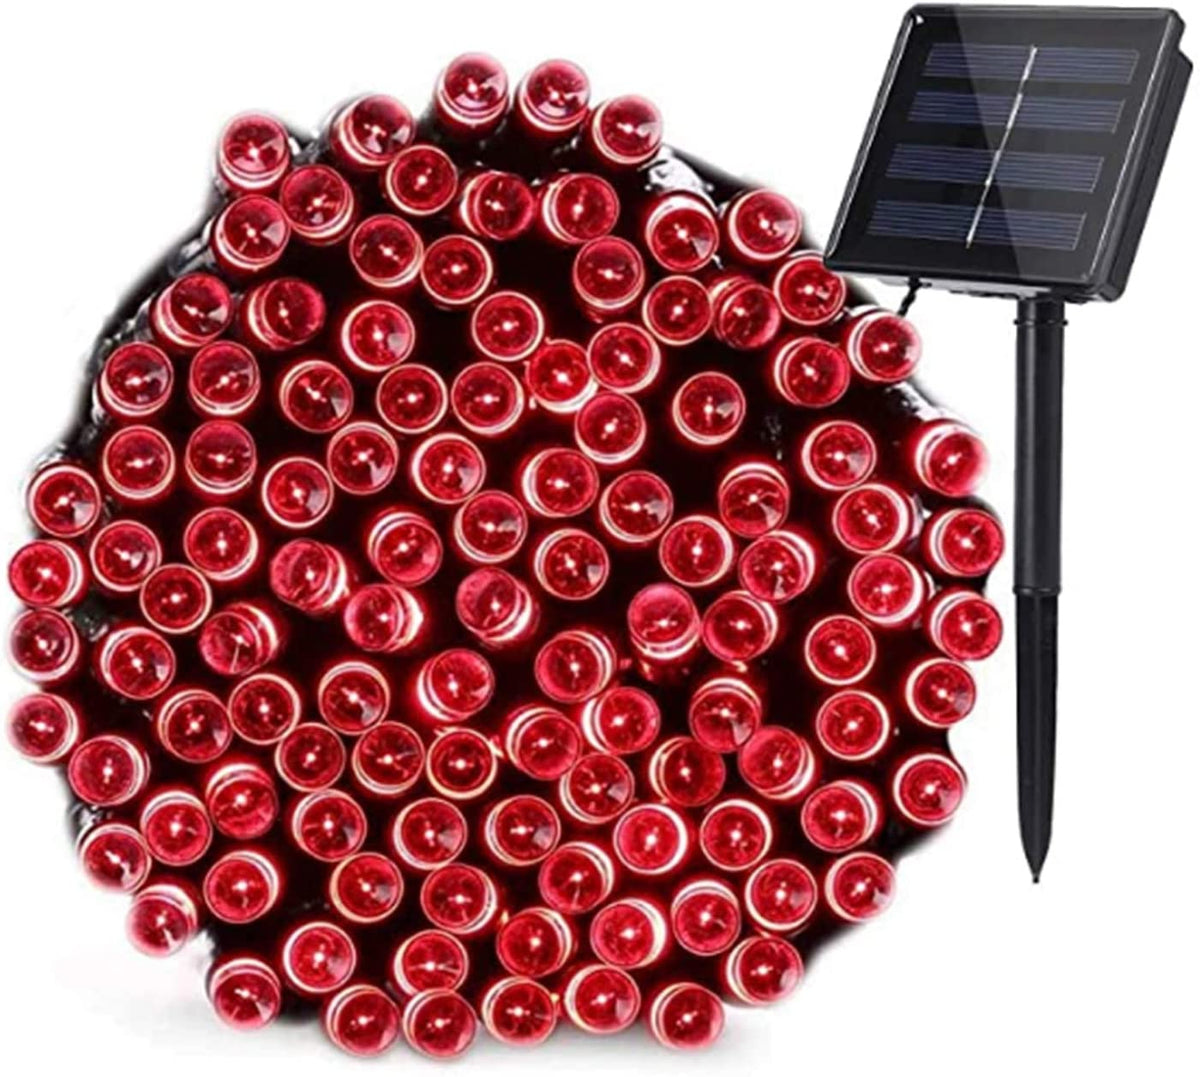 100 LED Solar String Lights 42ft 8 Modes Outdoor Waterproof Lights for Garden, Tree, Yard, Christmas, Wedding, Party